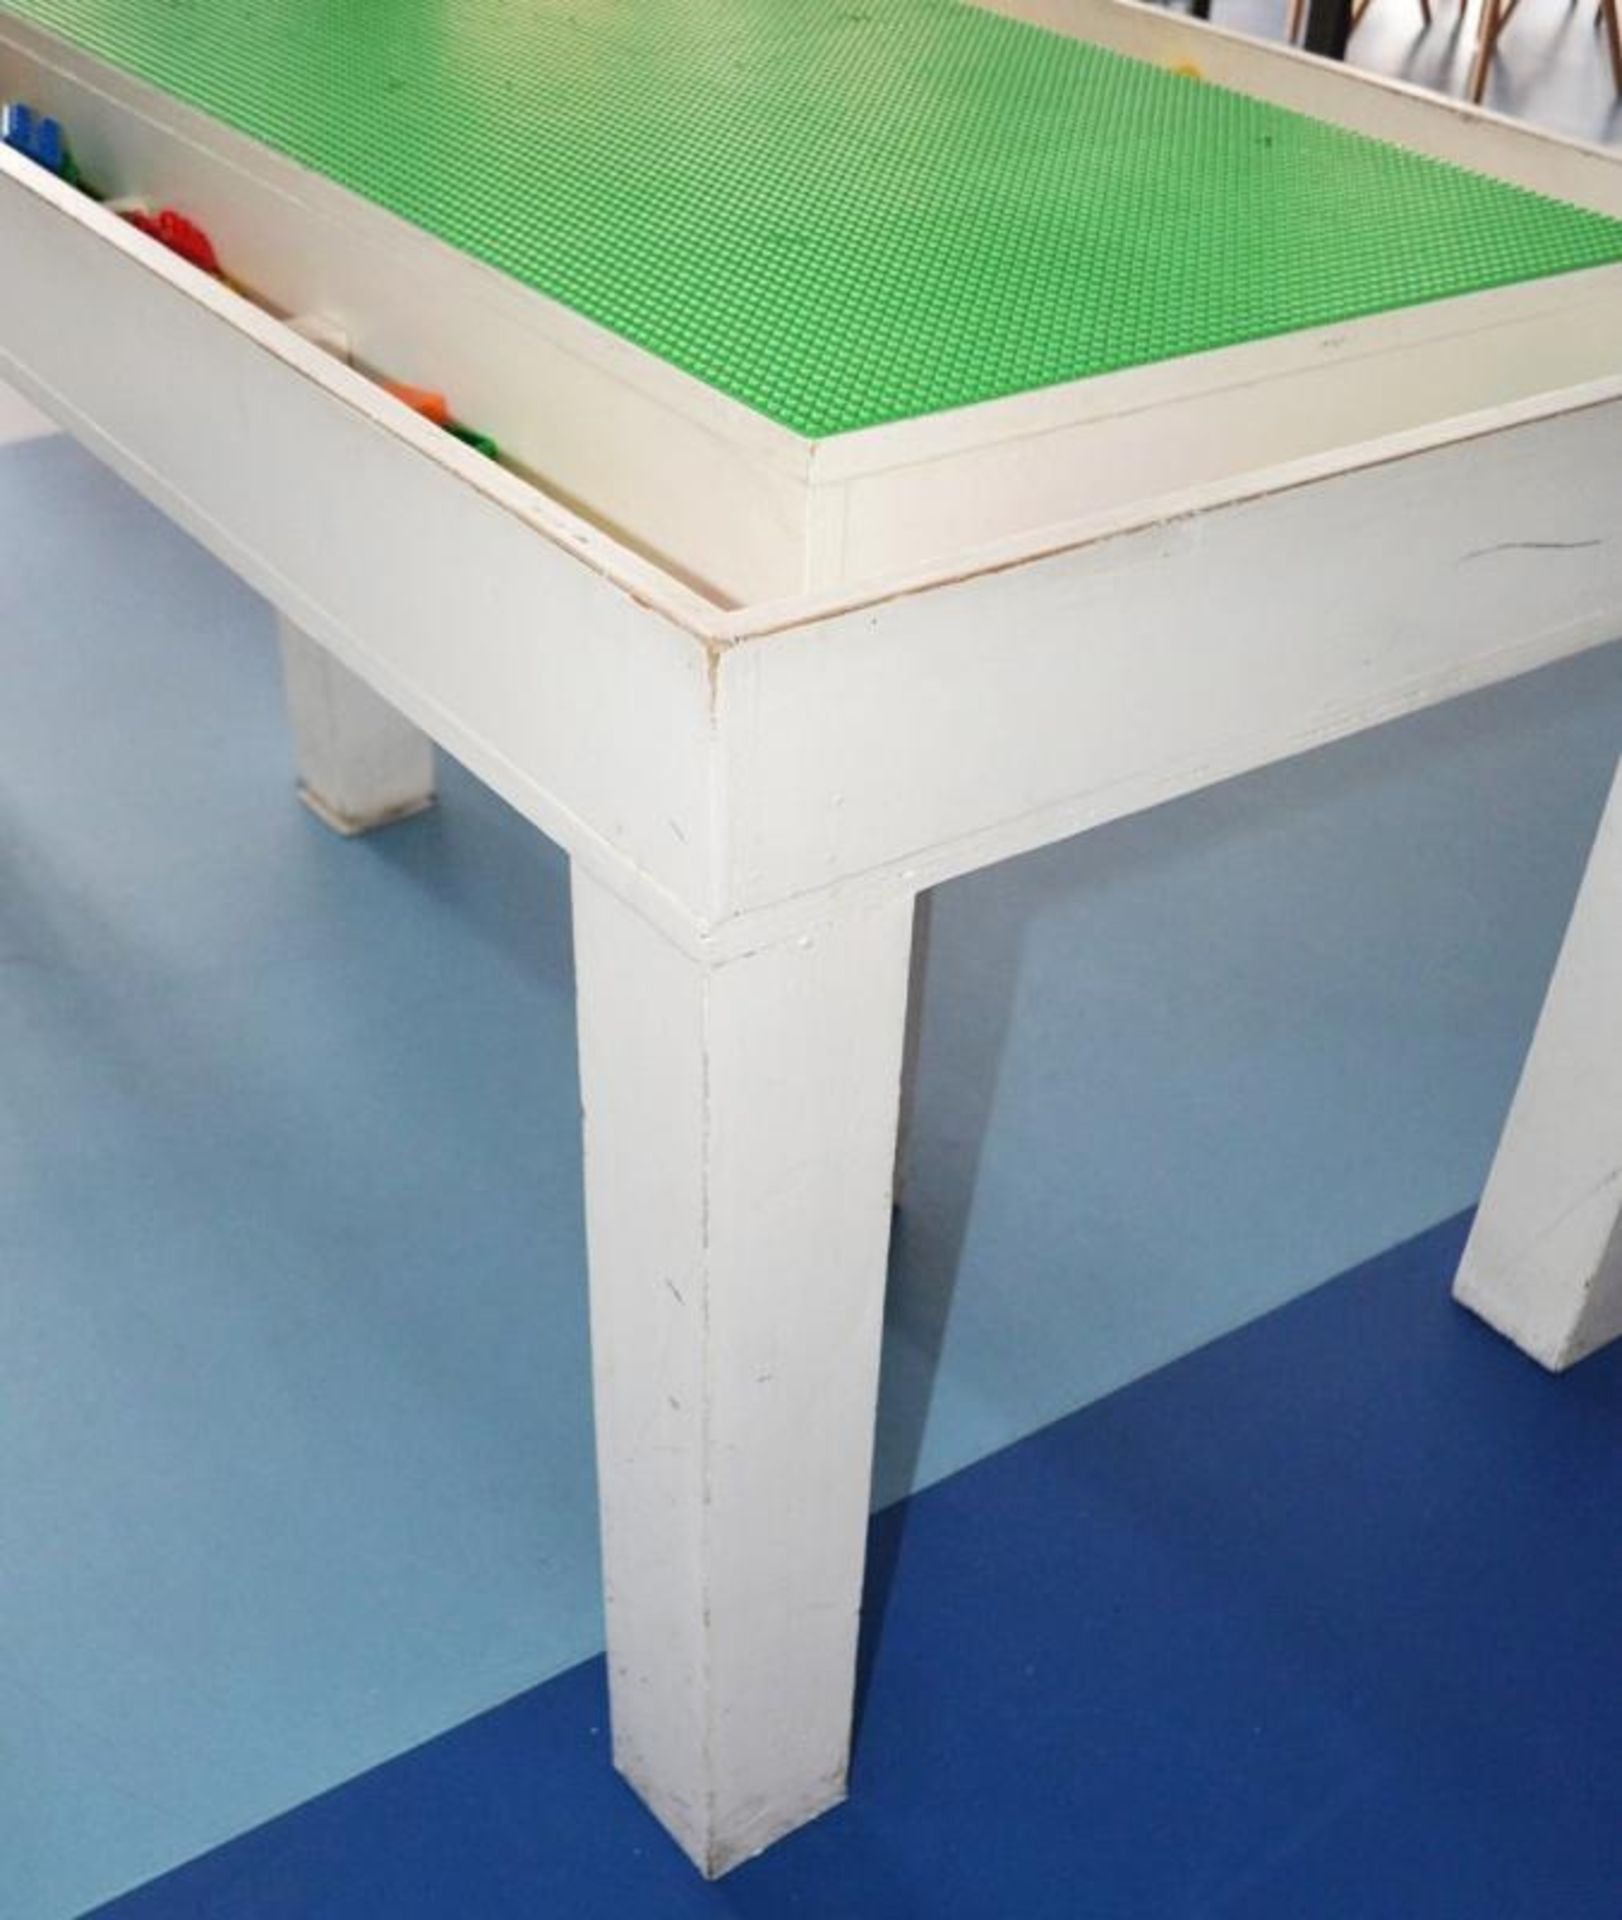 1 x Large Lego Table With Storage Trough - CL425 - Location: Altrincham WA14 - Image 4 of 5